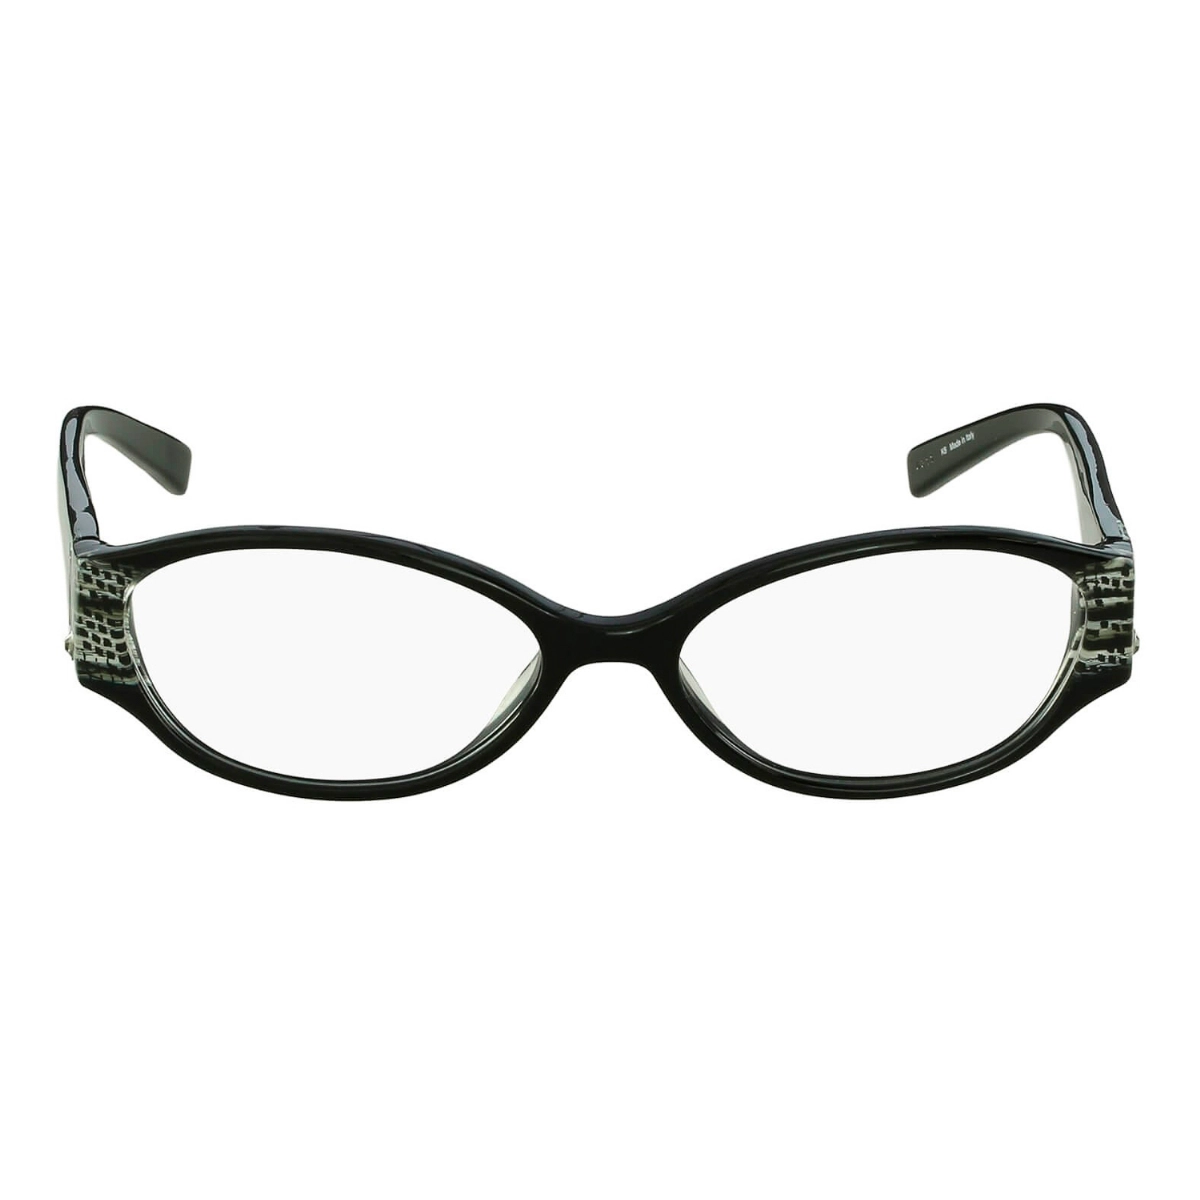 GLASSES WOMEN GUESS MARCIANO GM130-52-BLK